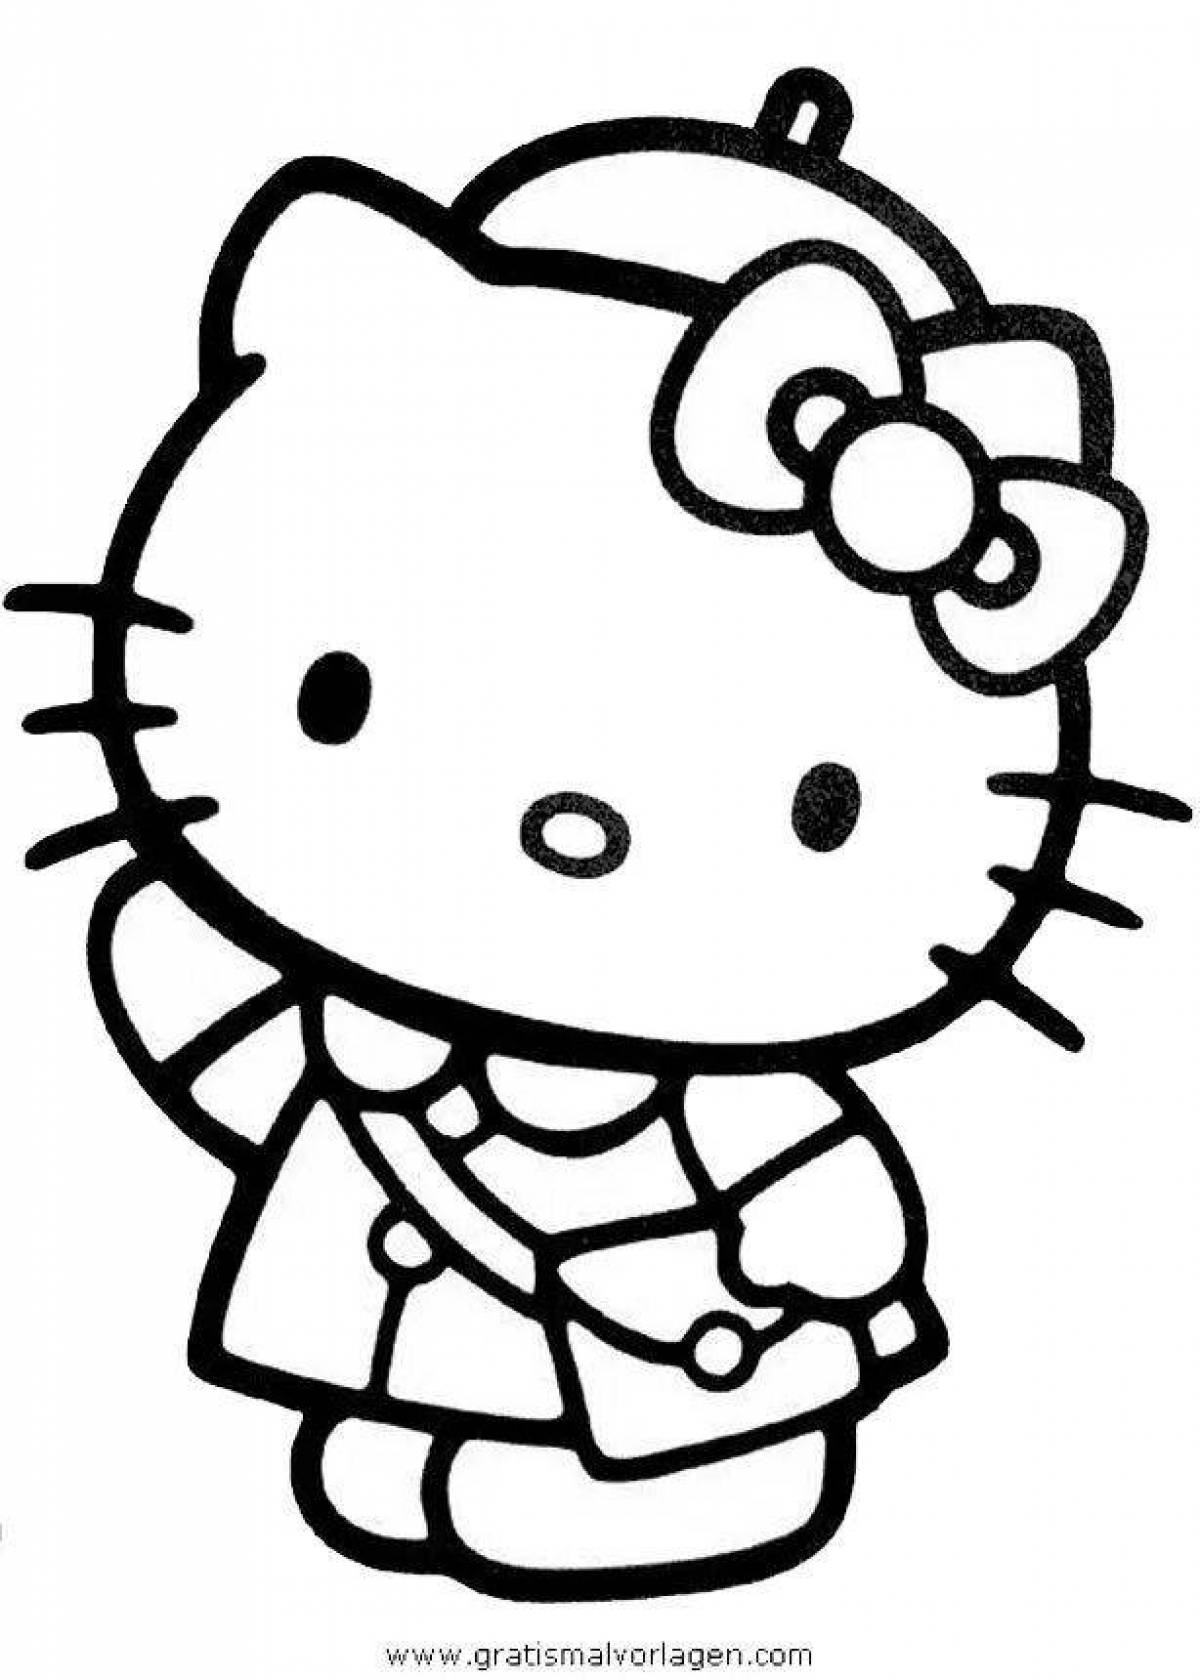 Adorable hello kitty coloring book in black and white